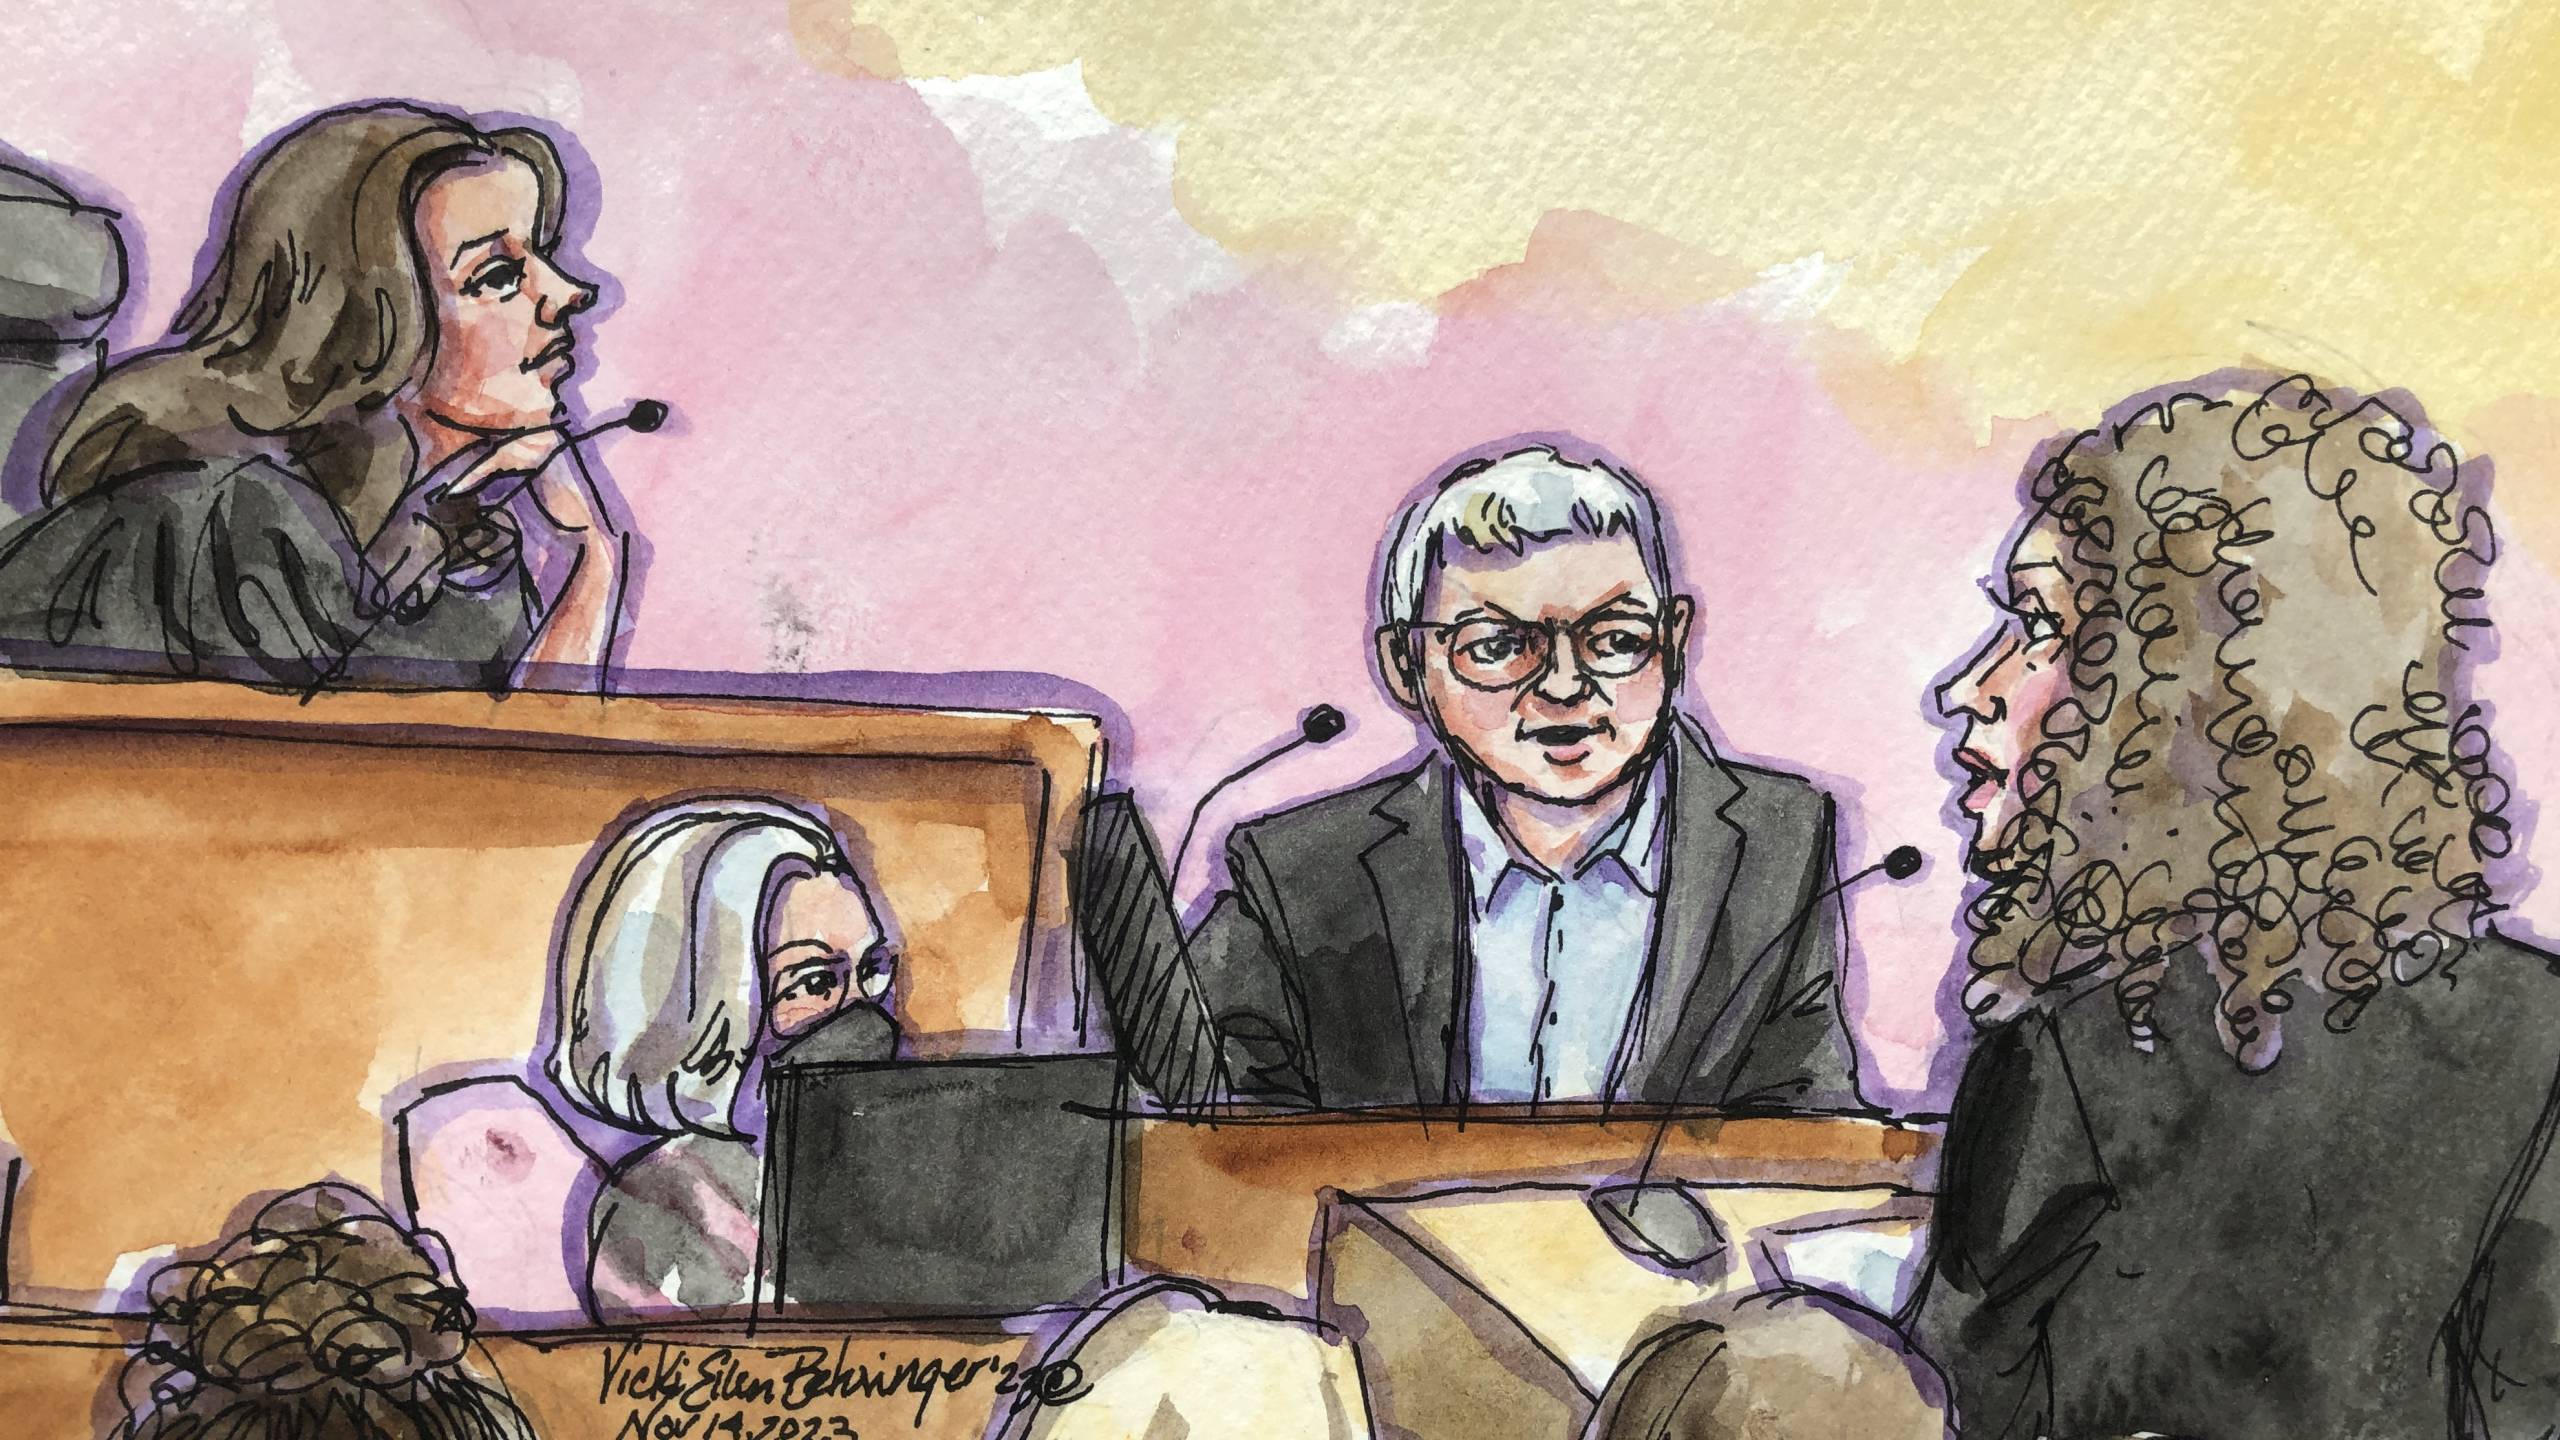 A watercolor sketch of an older woman with short grey hair on the witness stand next to a judge, with another woman, with curly hair, facing her.